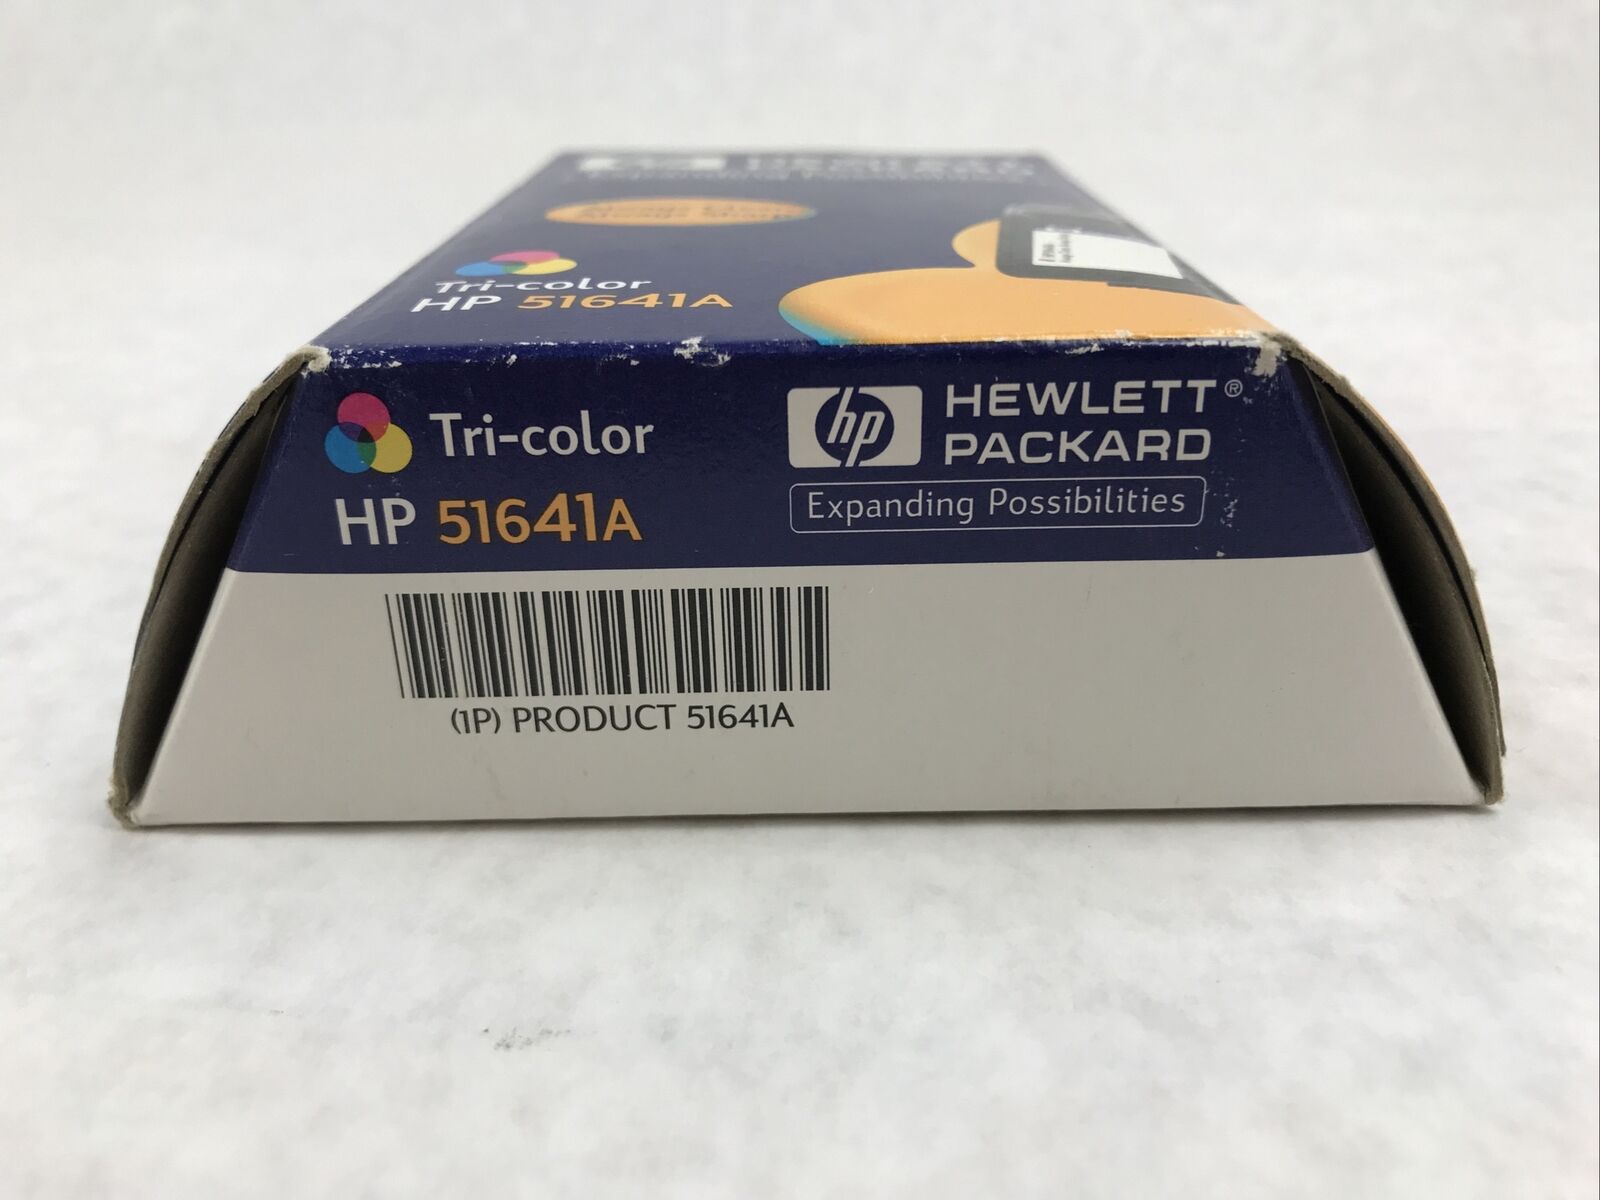 Genuine HP 41 51641A Tricolor Printer Ink Cartridge - Expired